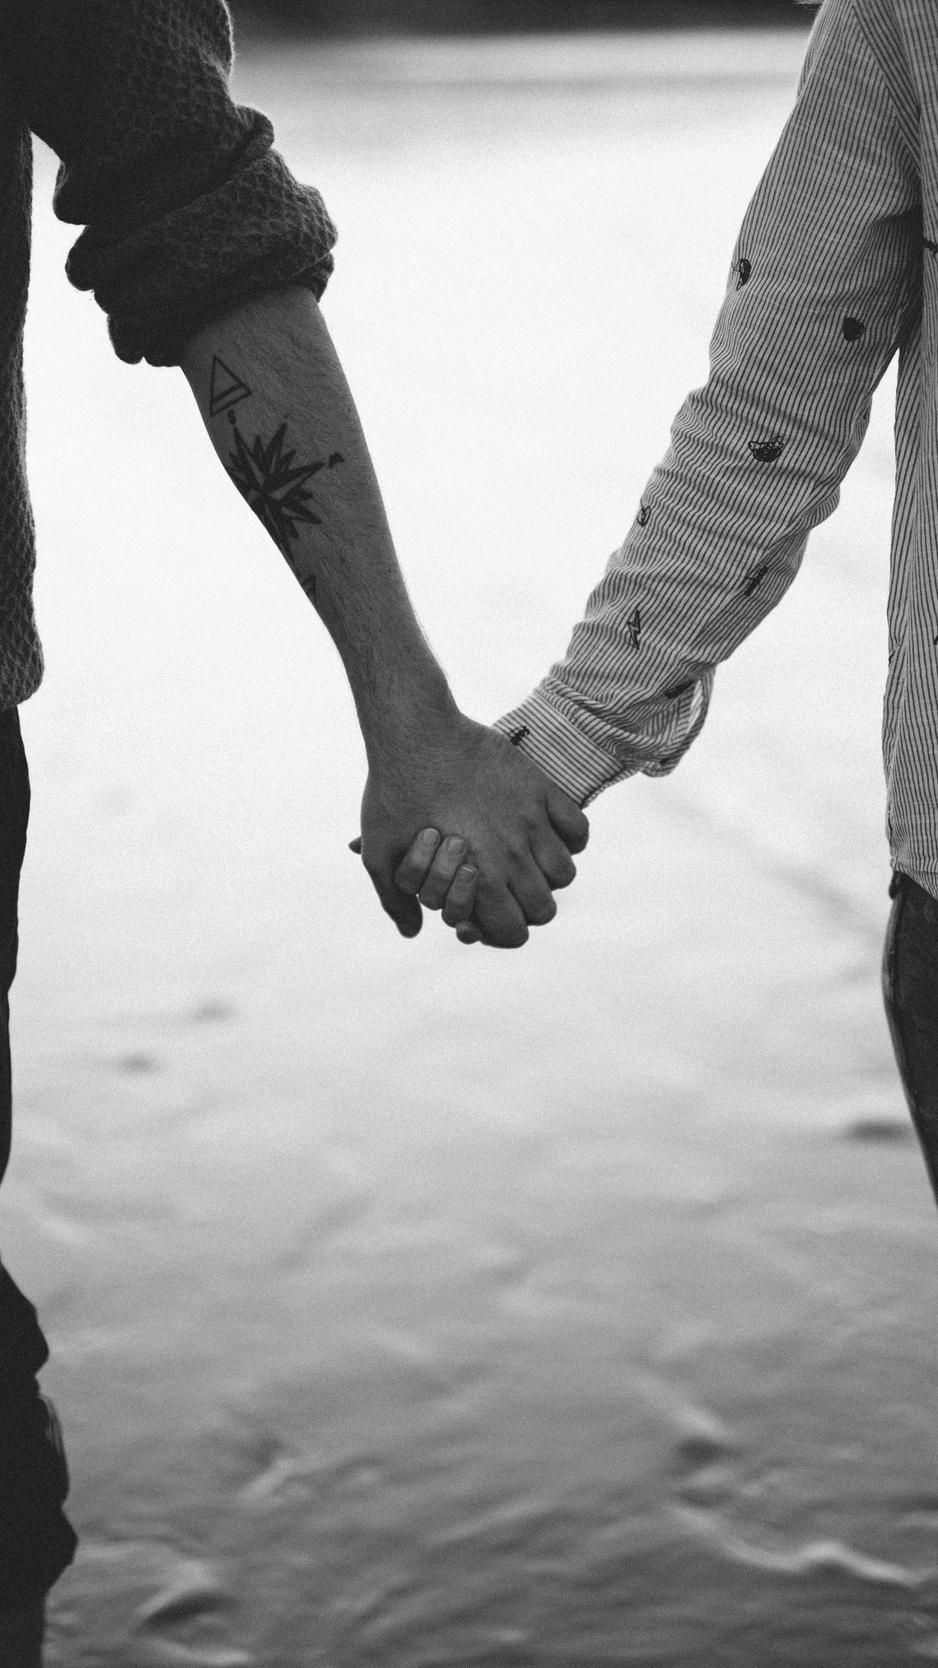 Download wallpaper 938x1668 hands, couple, bw, love iphone 8